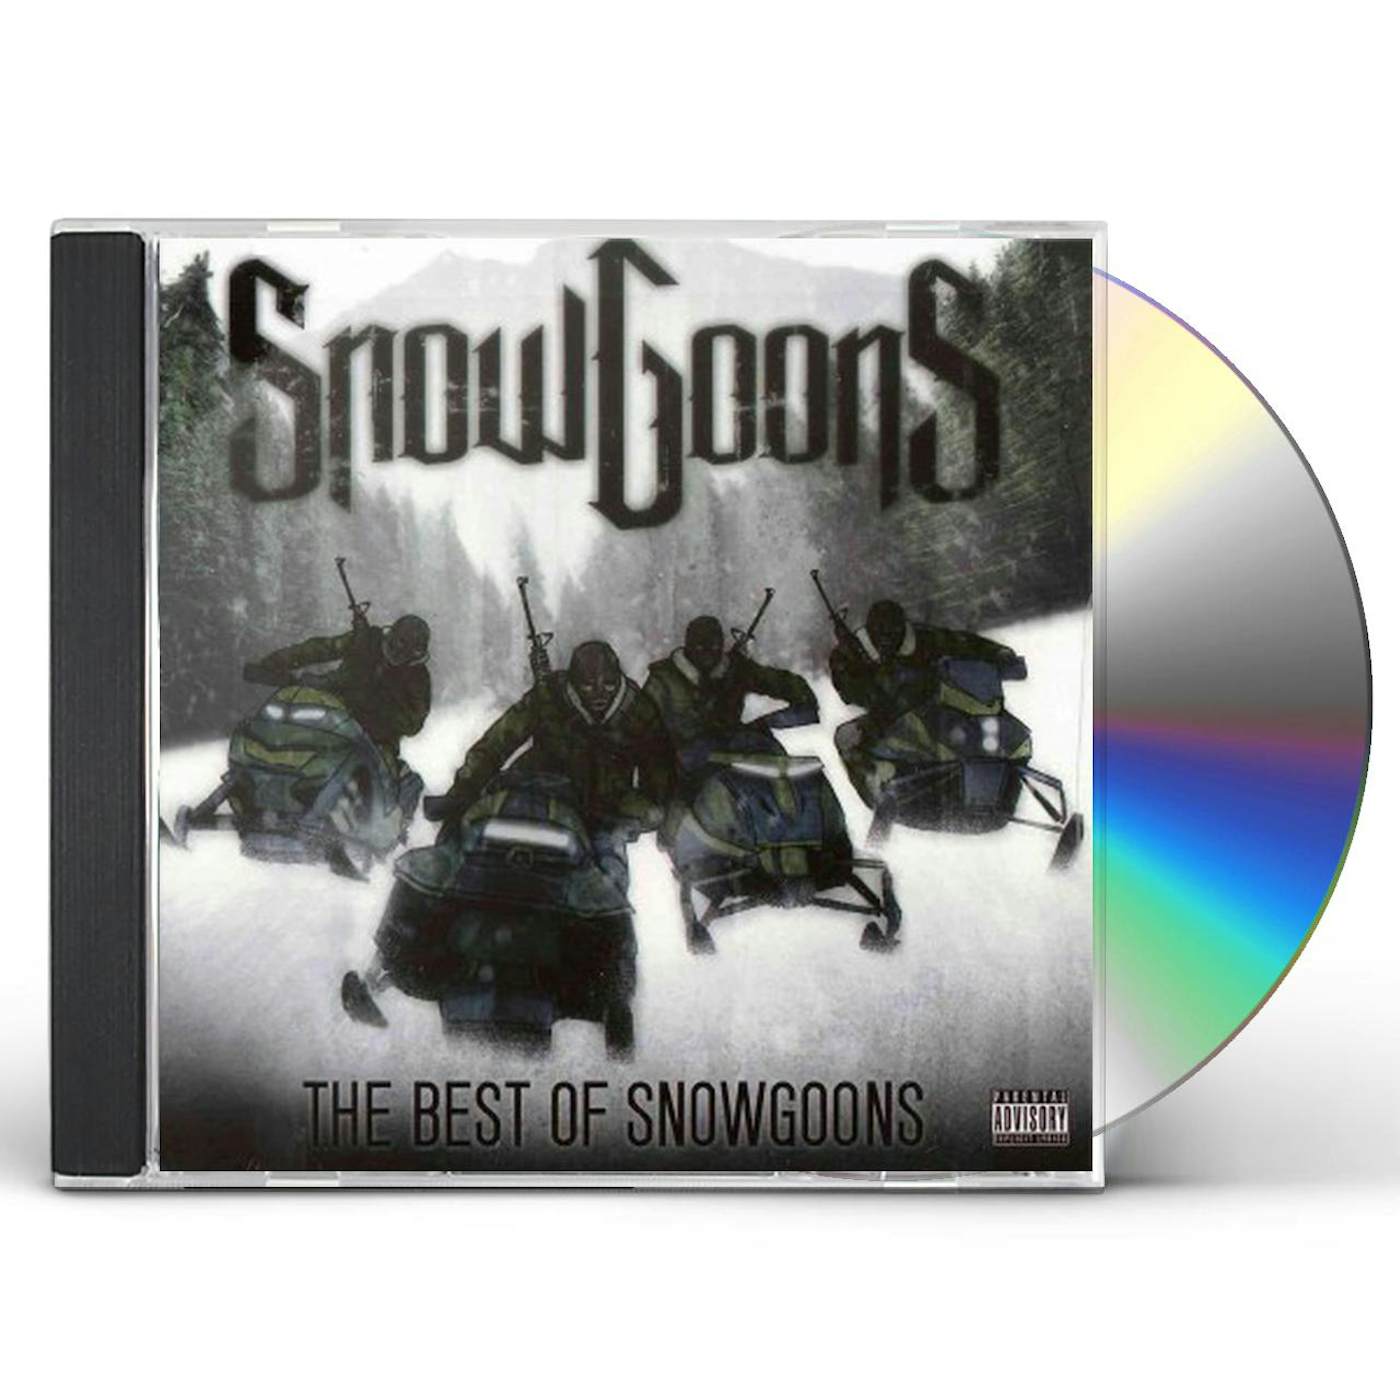 BEST OF SNOWGOONS CD